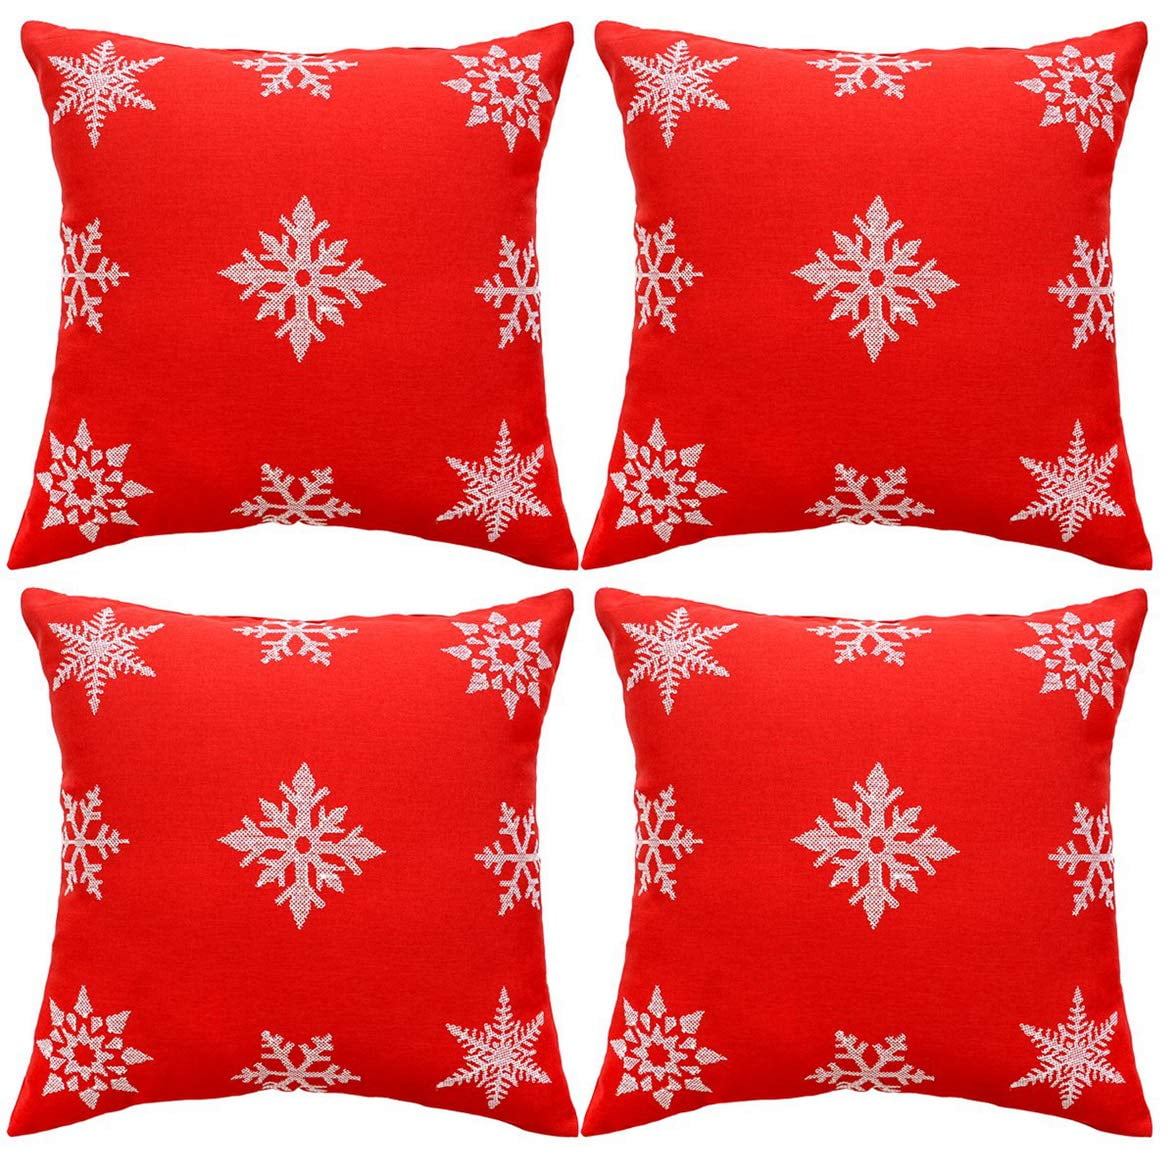 SUFAM Set of 4 Pillow Cases Christmas Holiday Embroidered Snowflake Winter  Red Modern Pastoral Simple Throw Pillowcase Cover Cushion Case Home Decor  16x16 inch - Walmart.com